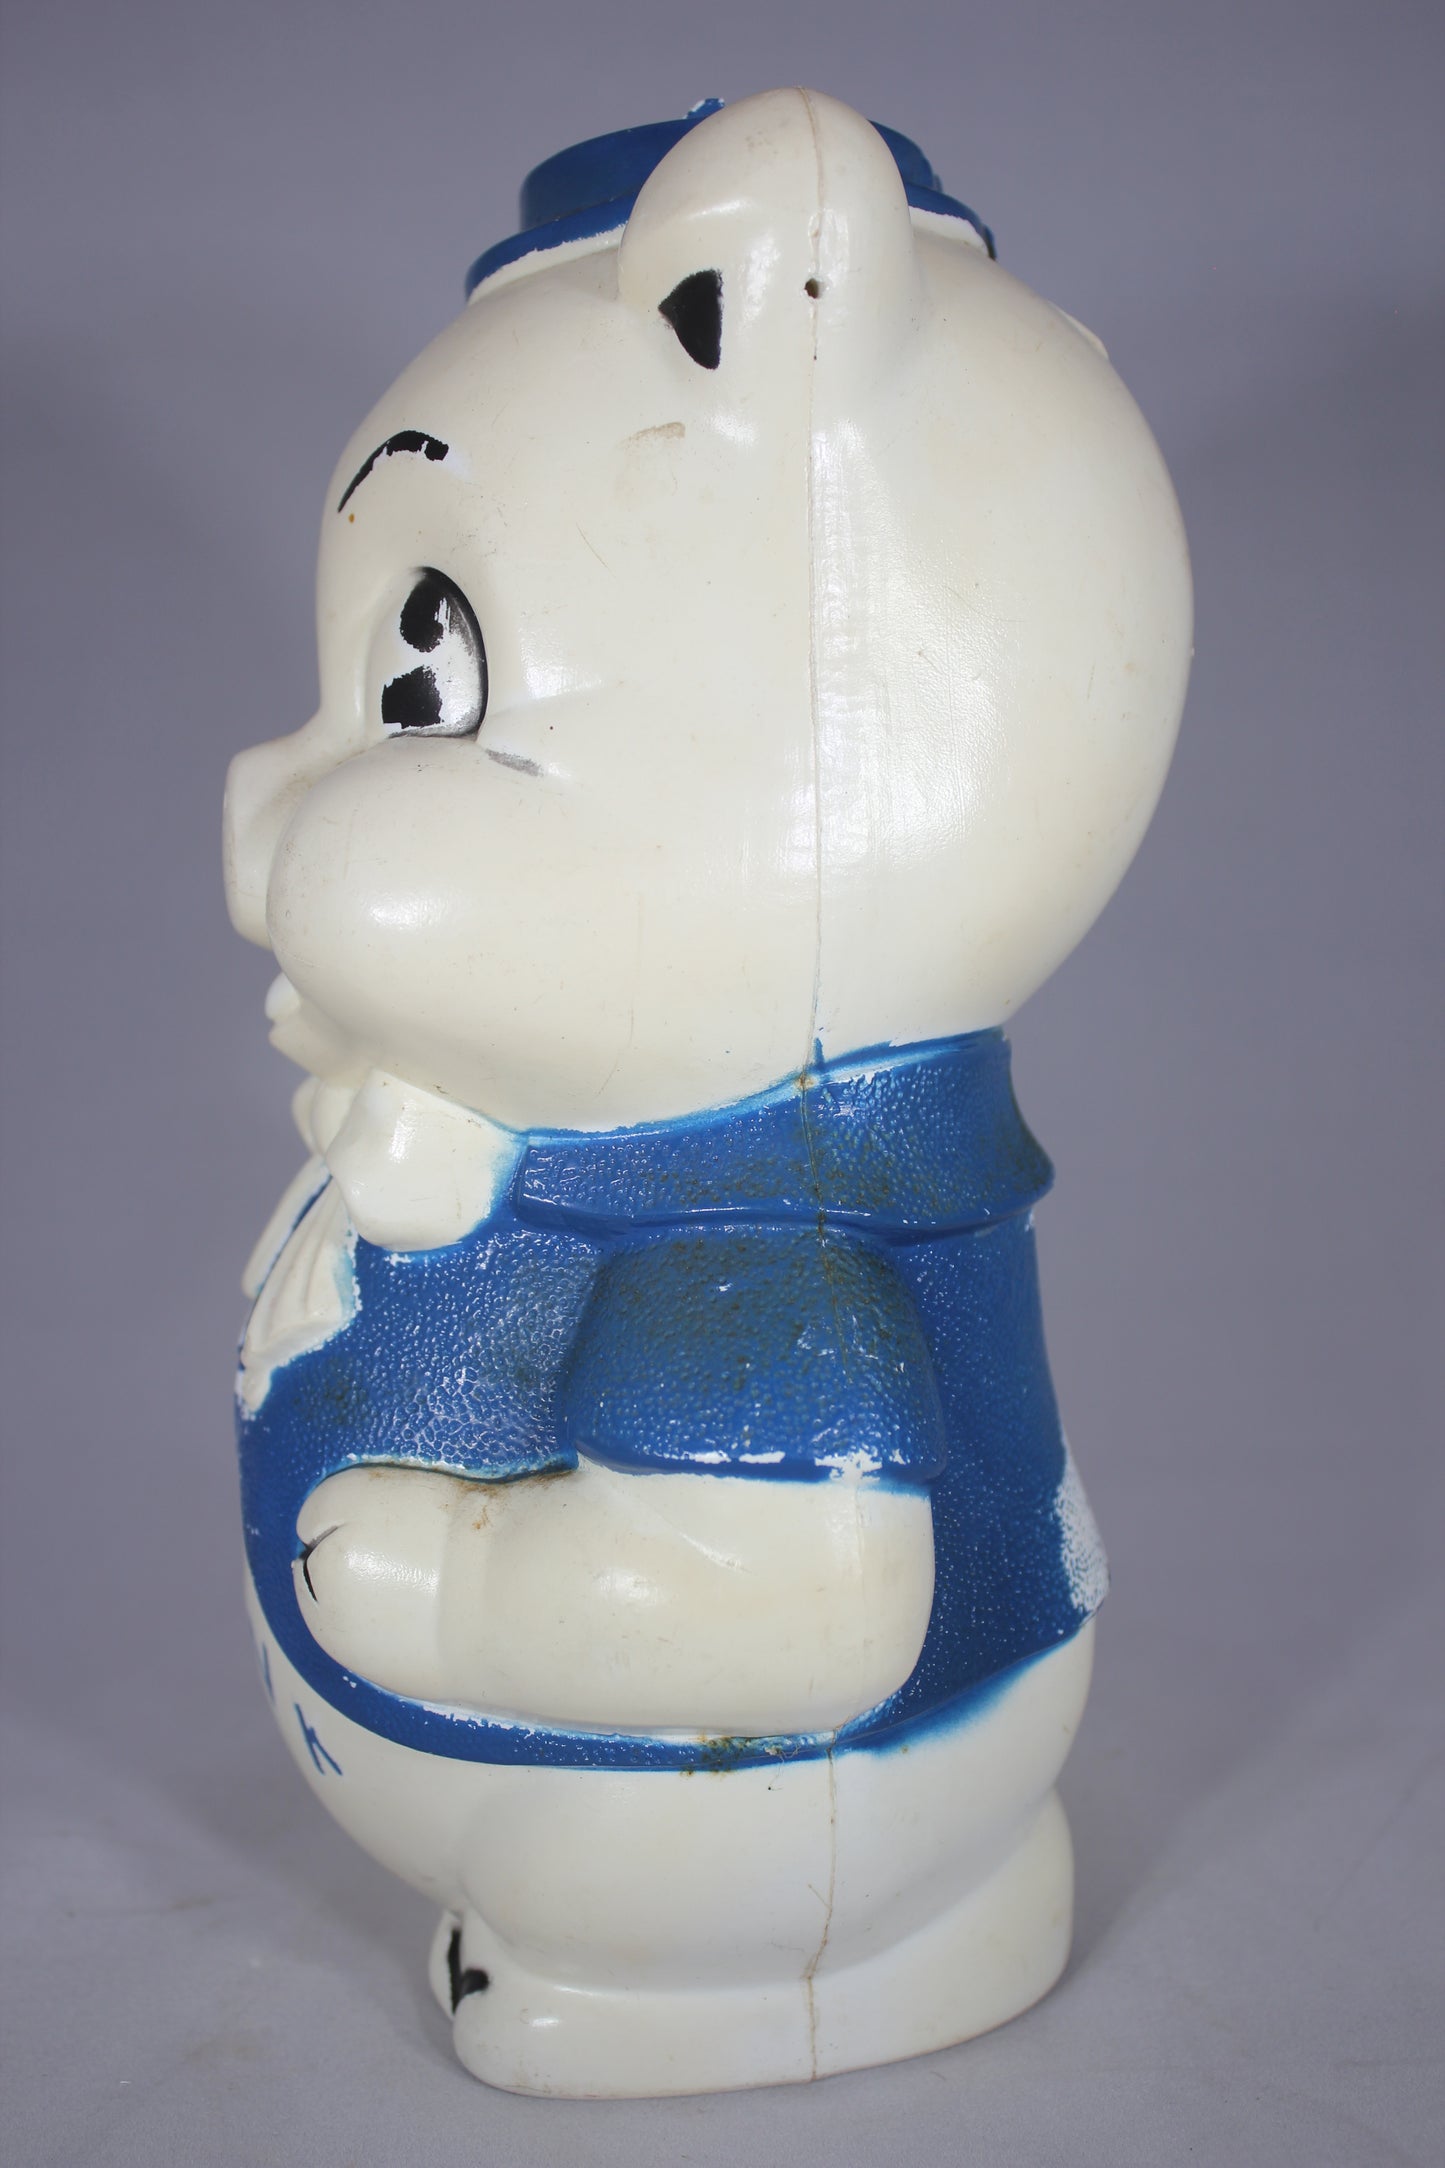 Porky Pig Plastic Blow Mold Bank by Empire